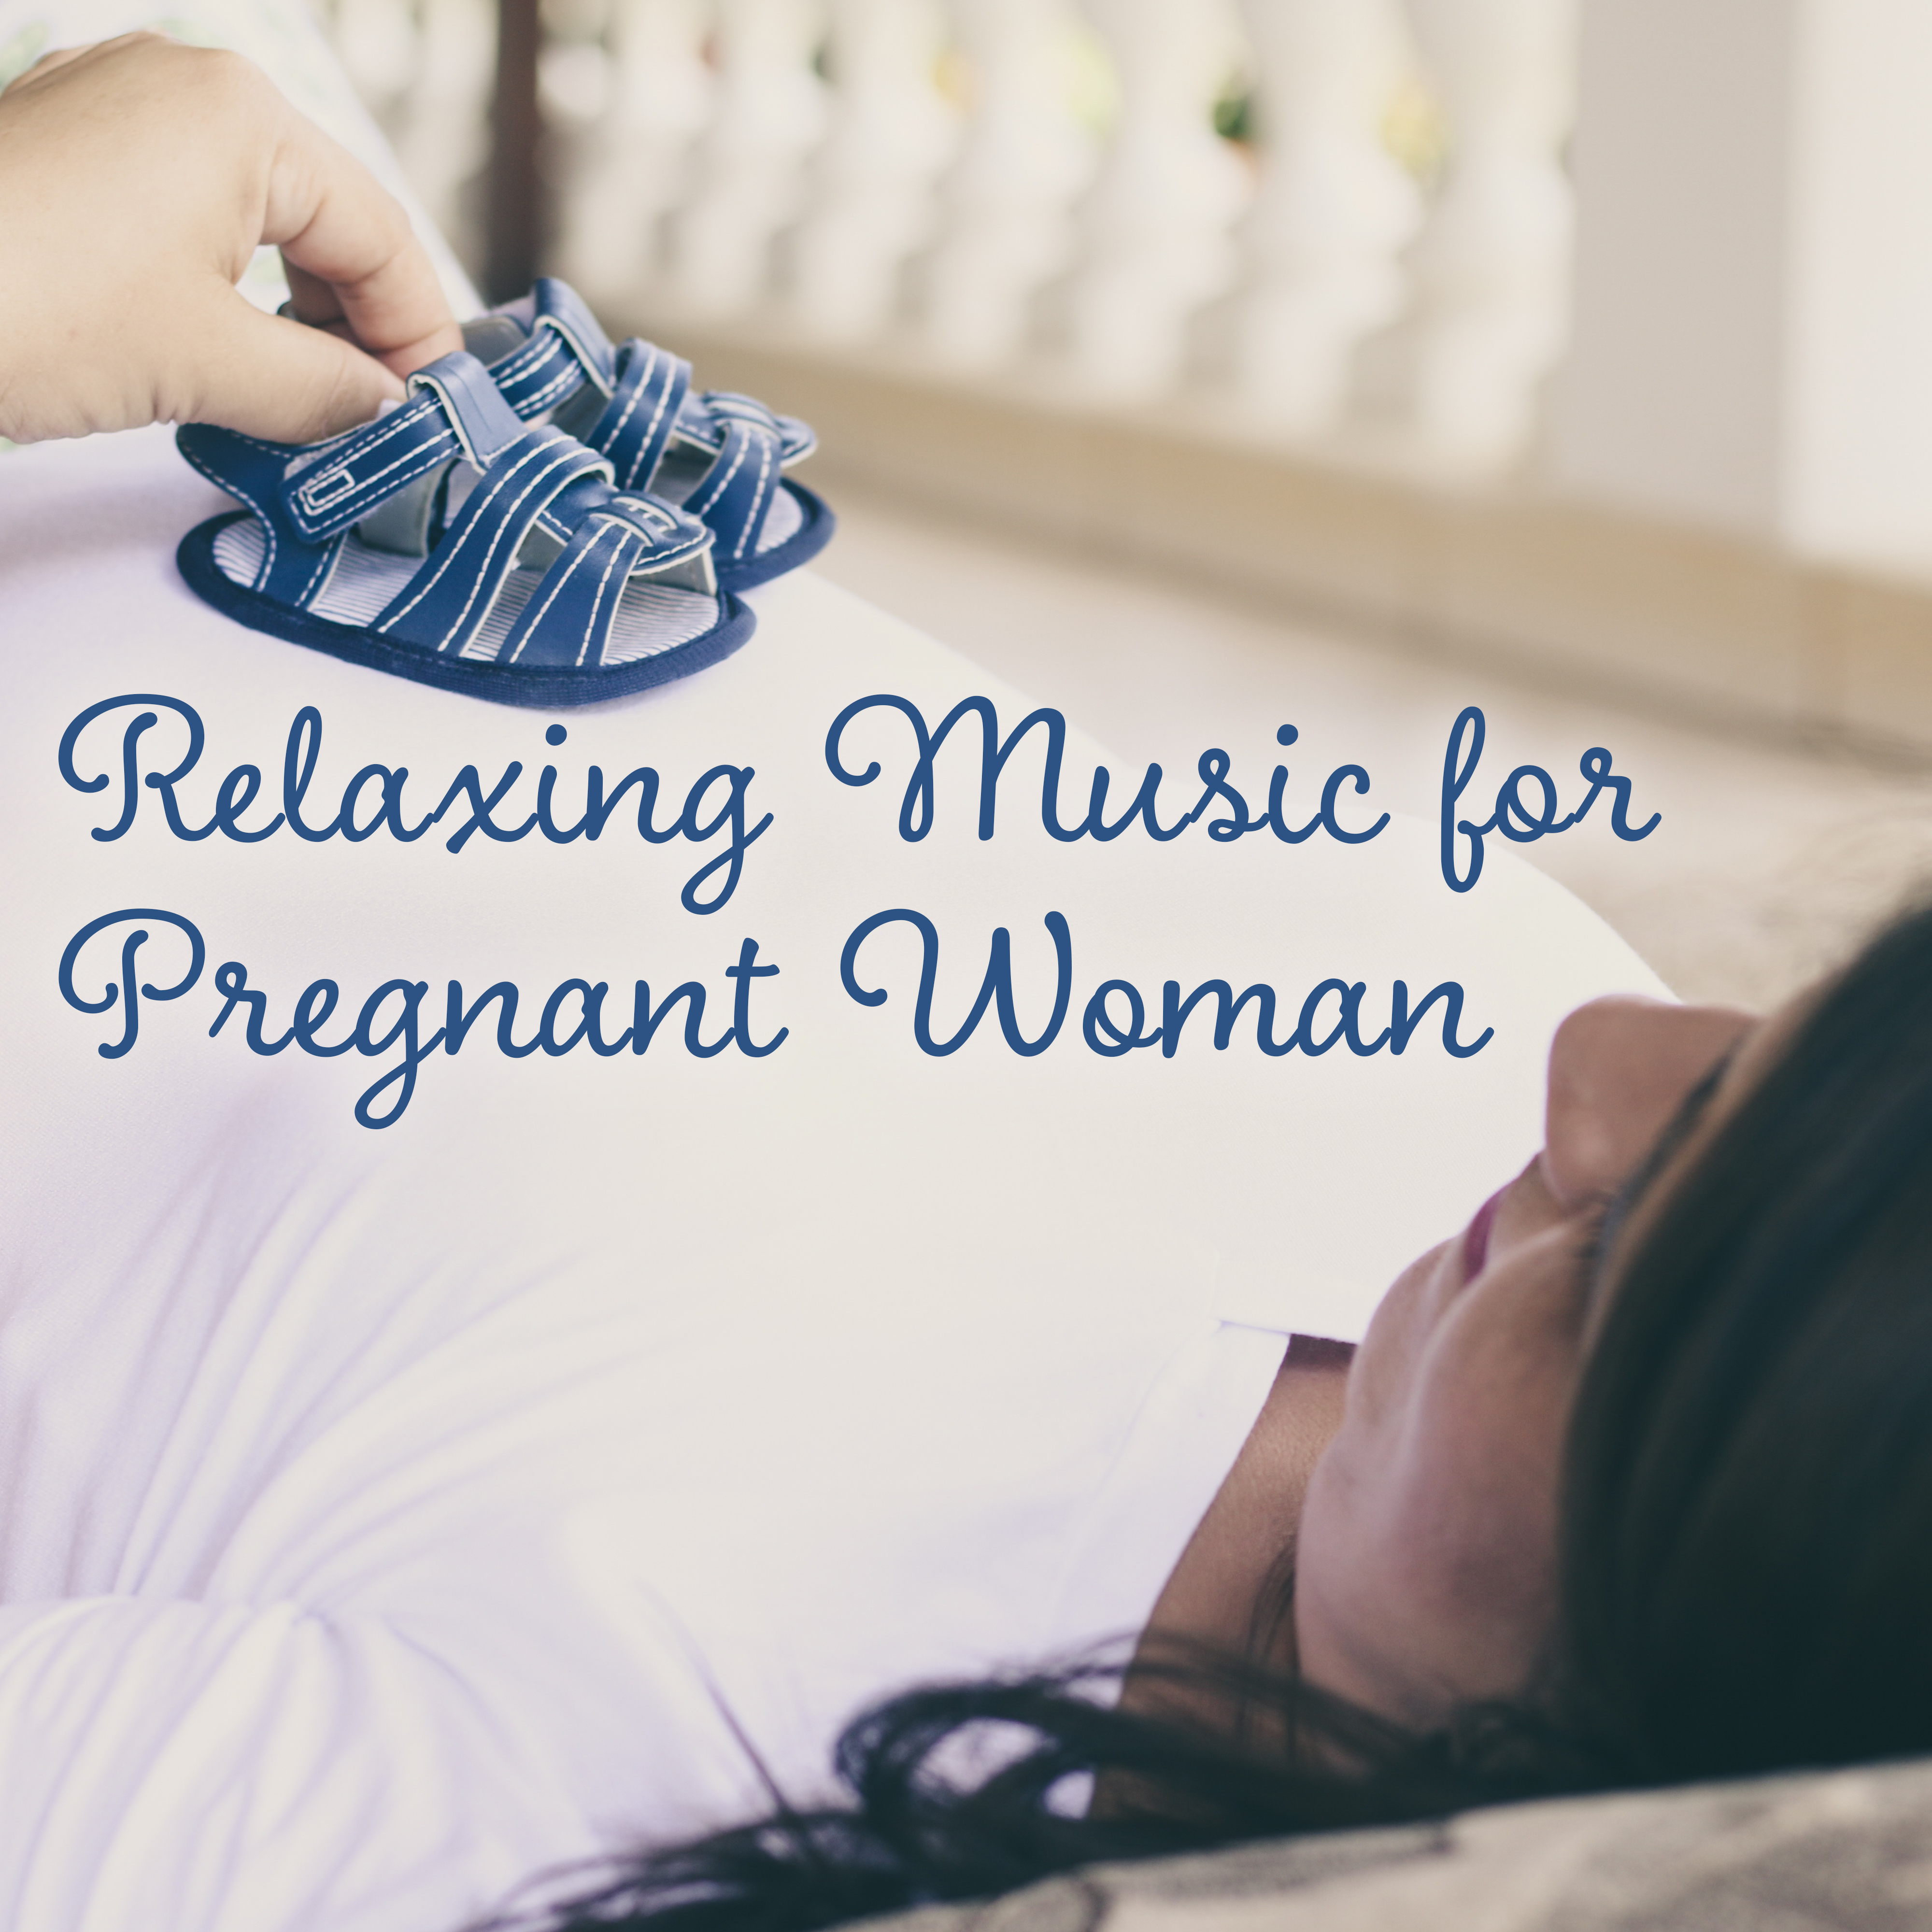 Relaxing Music for Pregnant Woman  Soothing Sounds, Pregnancy Music, Therapy Sounds, Prenatal Yoga, Meditation, Pure Relaxation